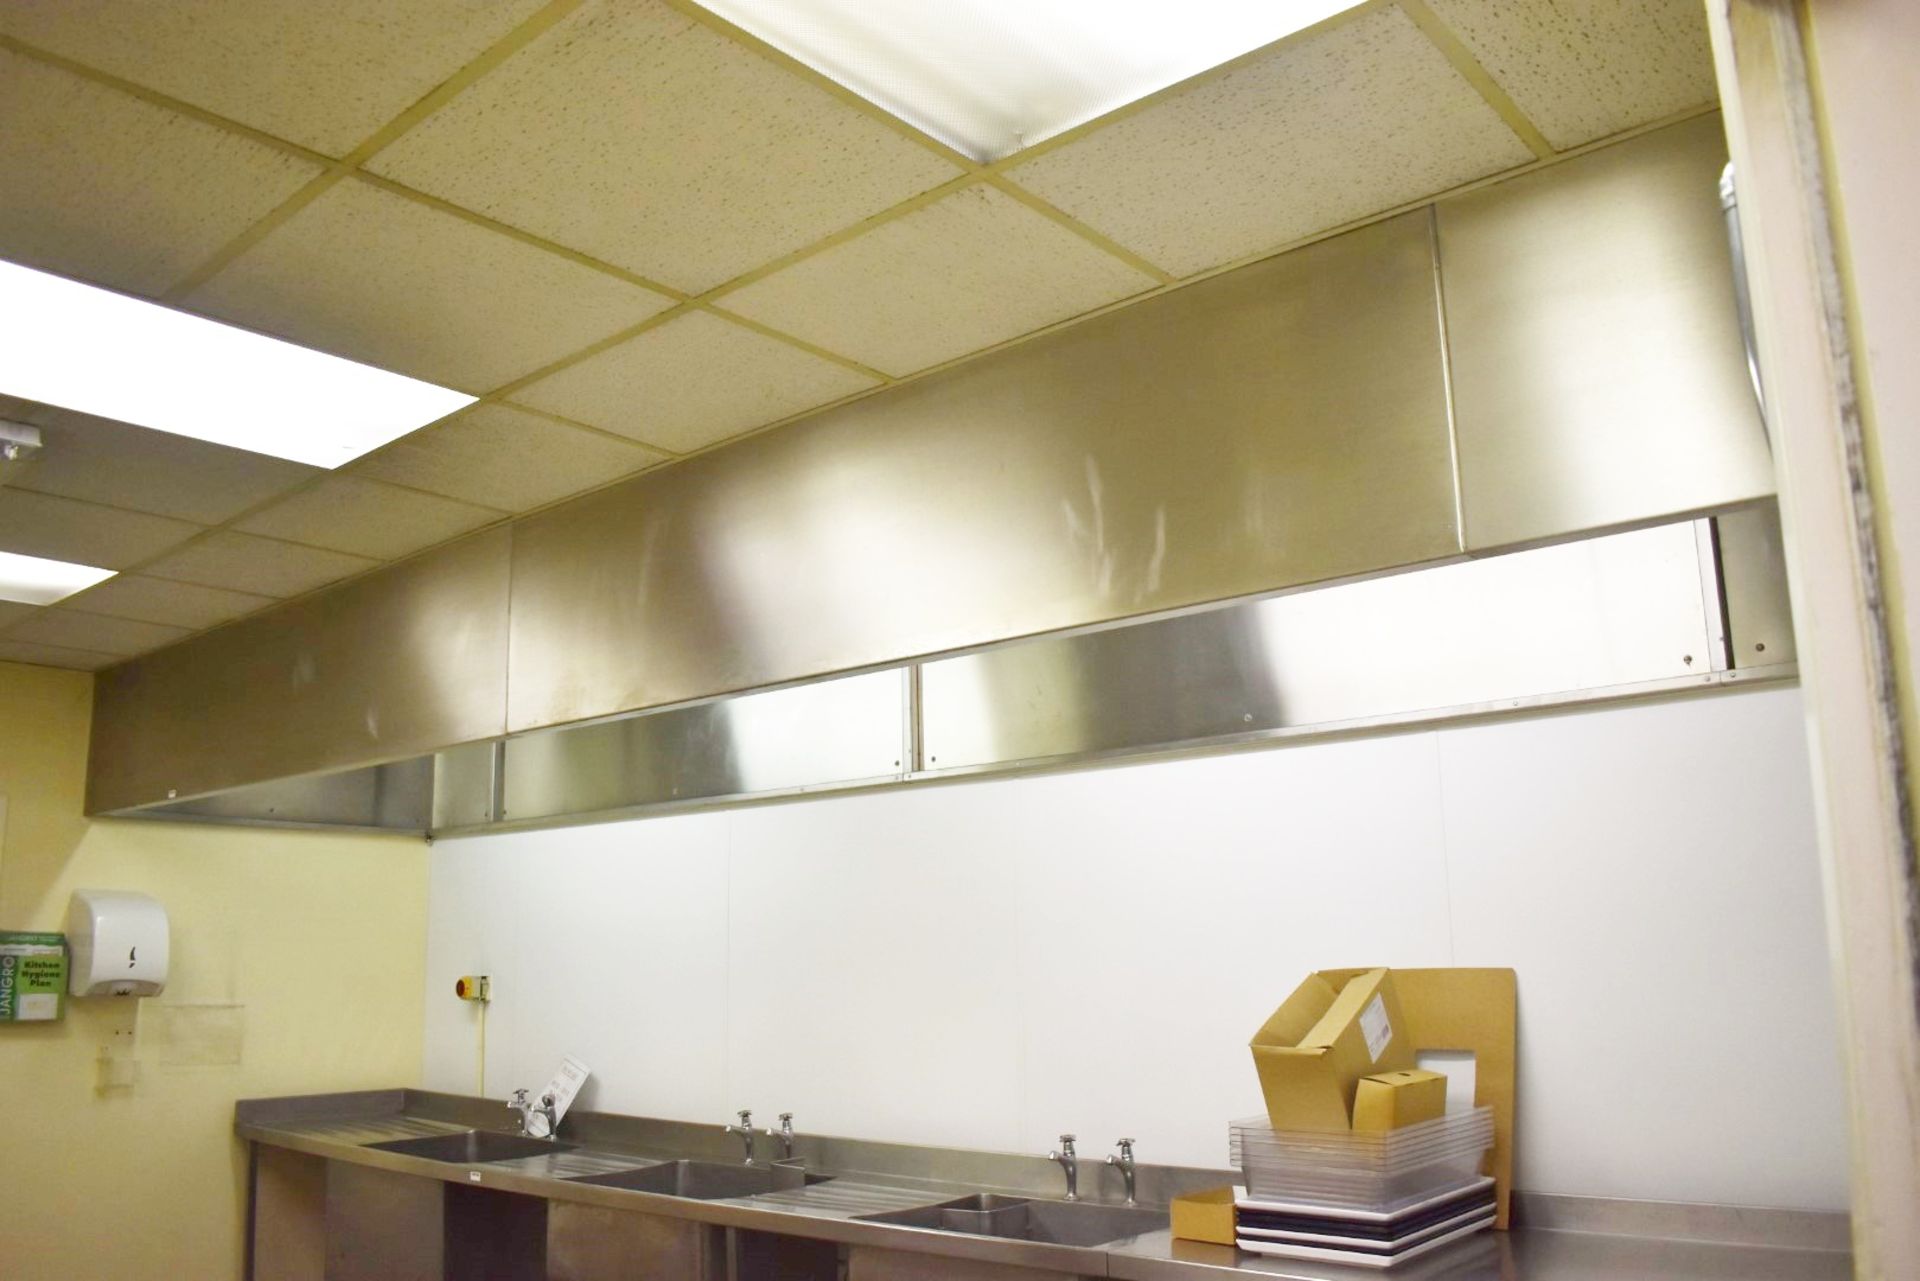 1 x Commerical Kitchen Ceiling Mounted Extractor Hood - Stainless Steel - Breaks into Multiple Parts